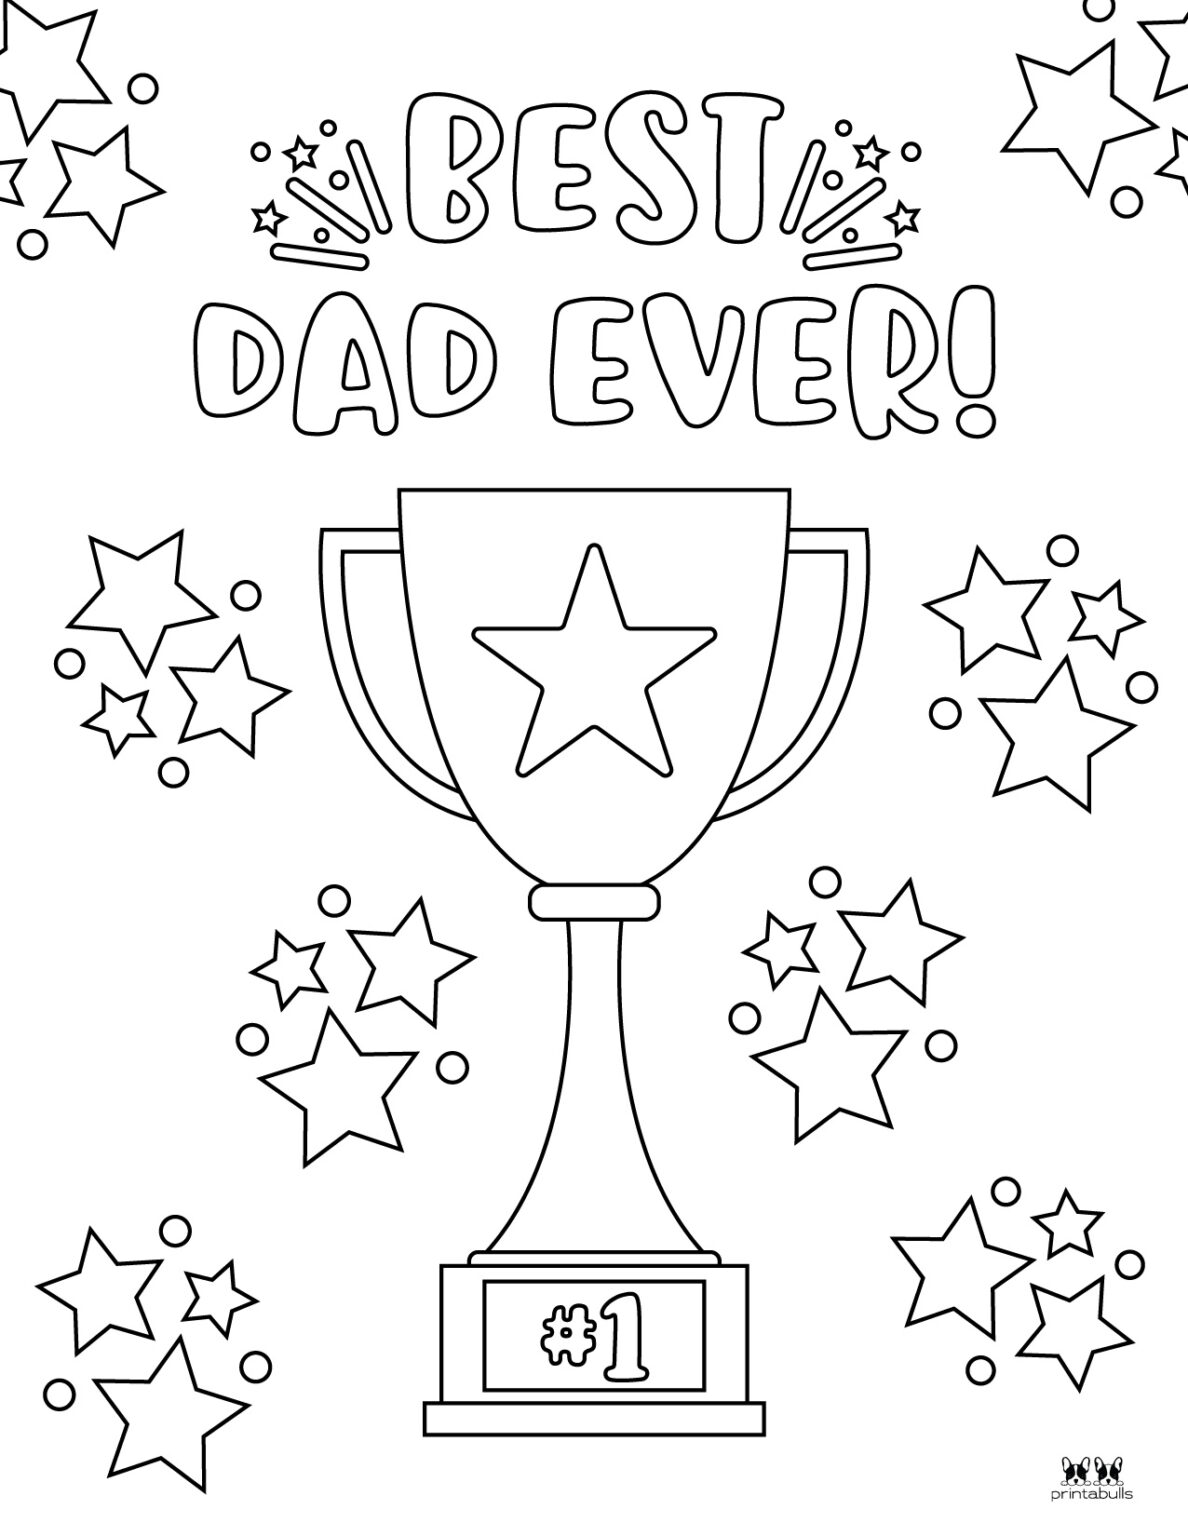 father-s-day-coloring-pages-10-free-pages-printabulls